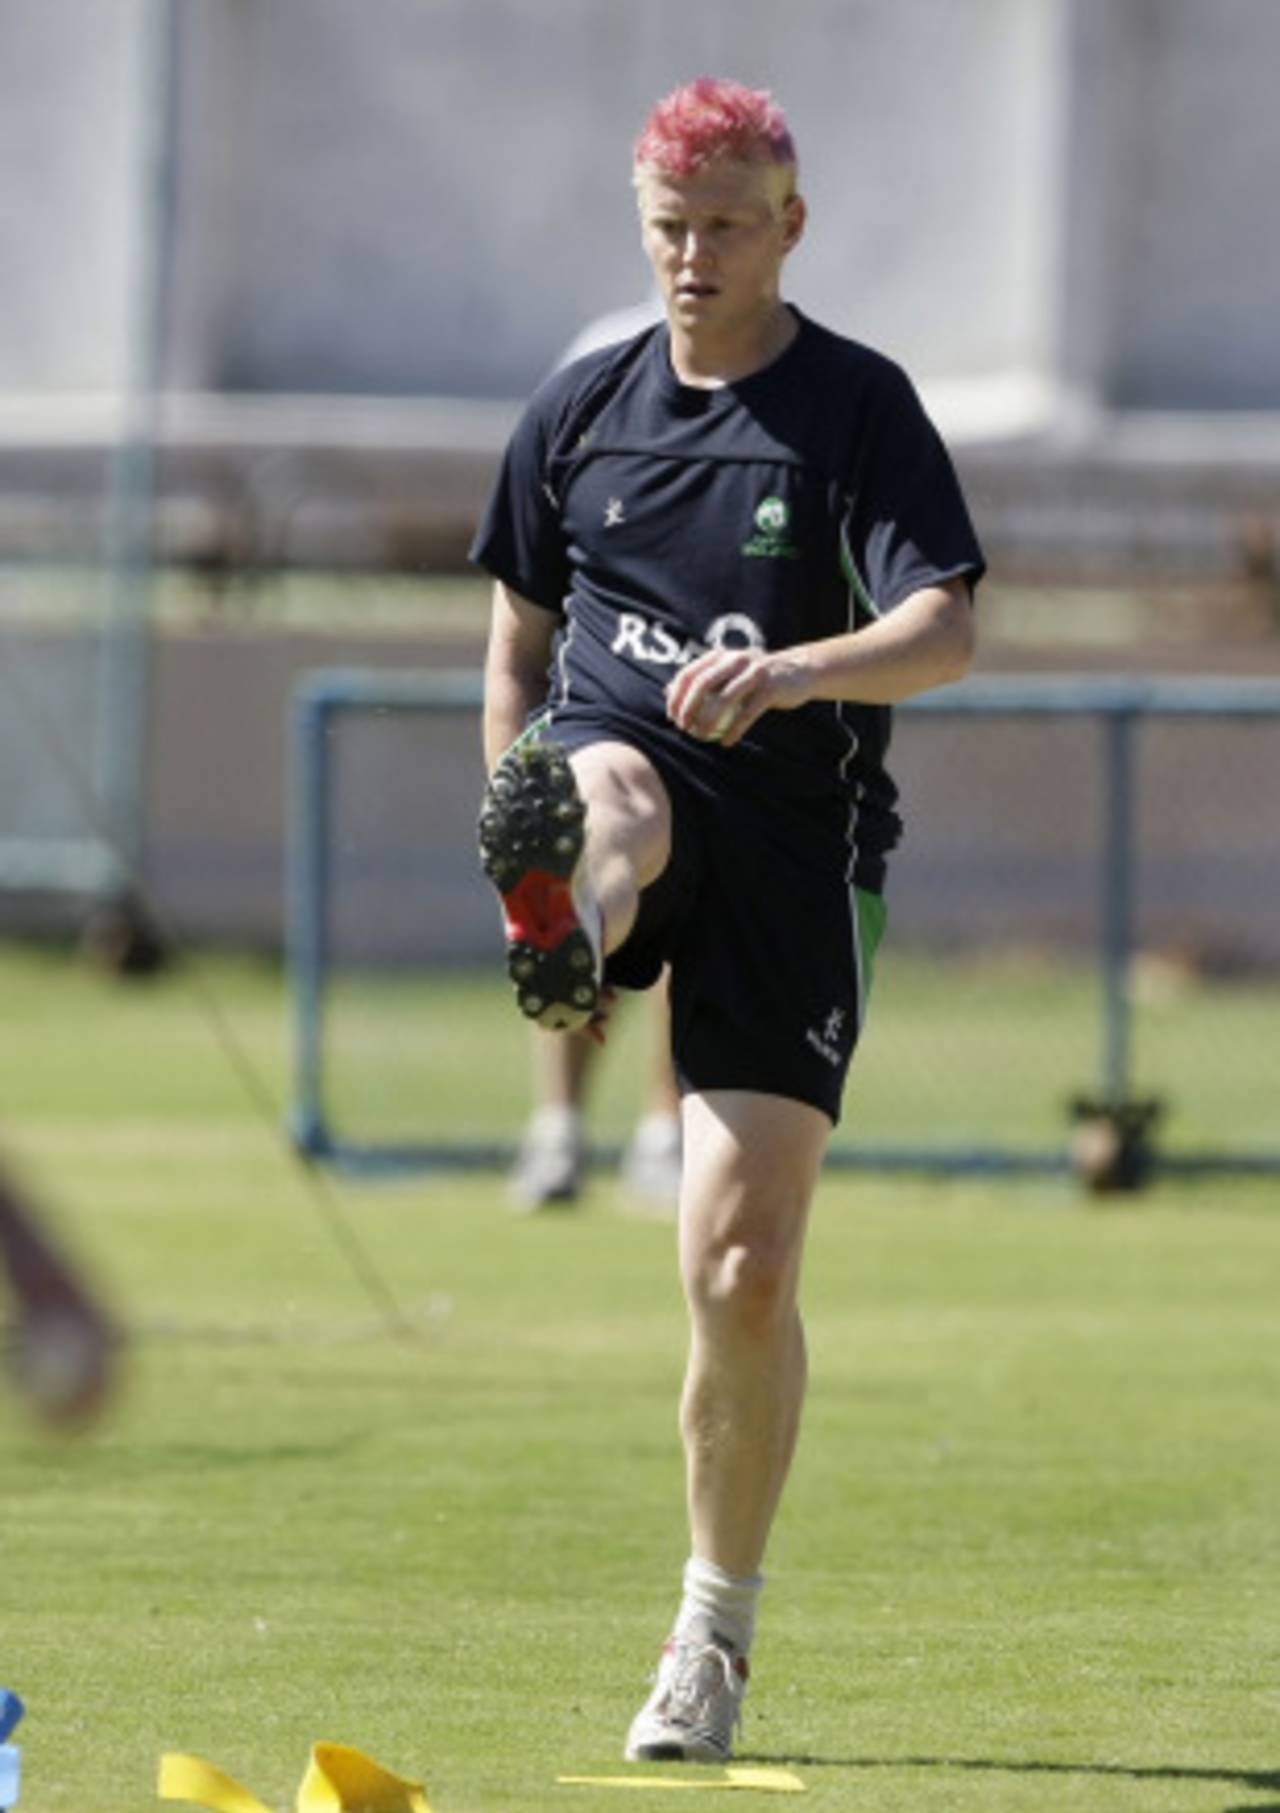 Kevin O'Brien warms up during Ireland's training session, Bangalore, March 5, 2011